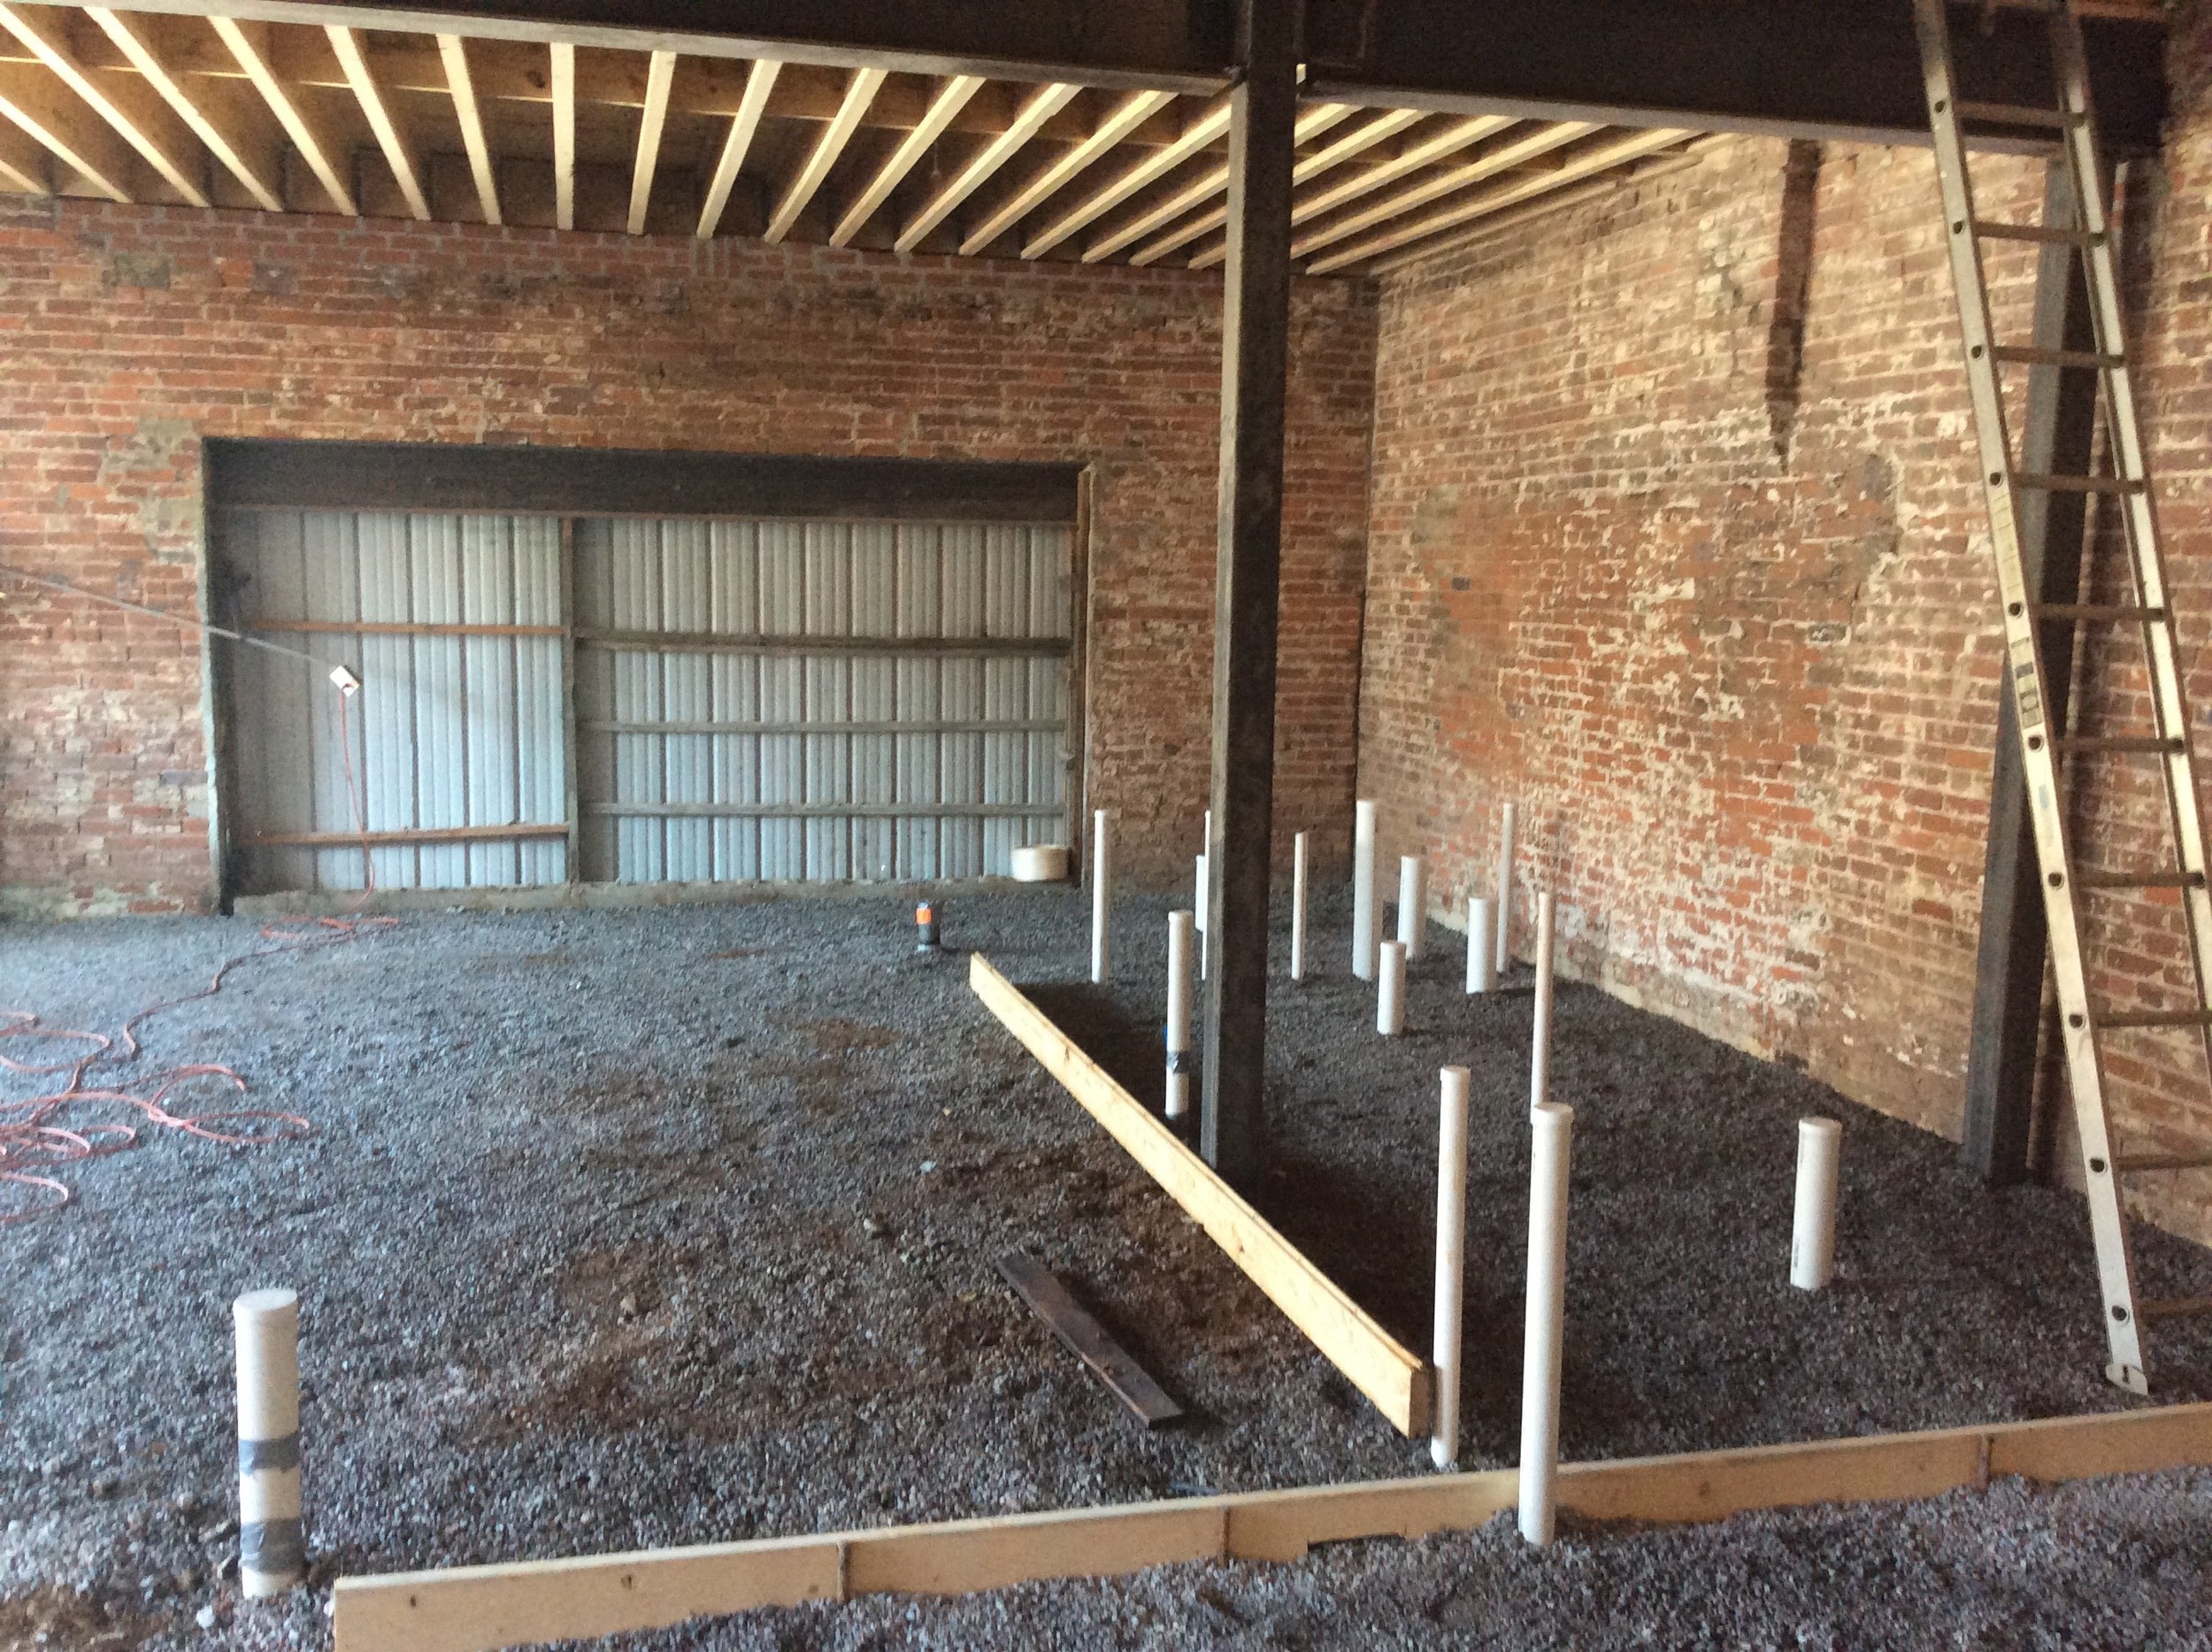  New plumbing in place, ready for the new floor. There will be a large window in the far wall, overlooking Main St. 